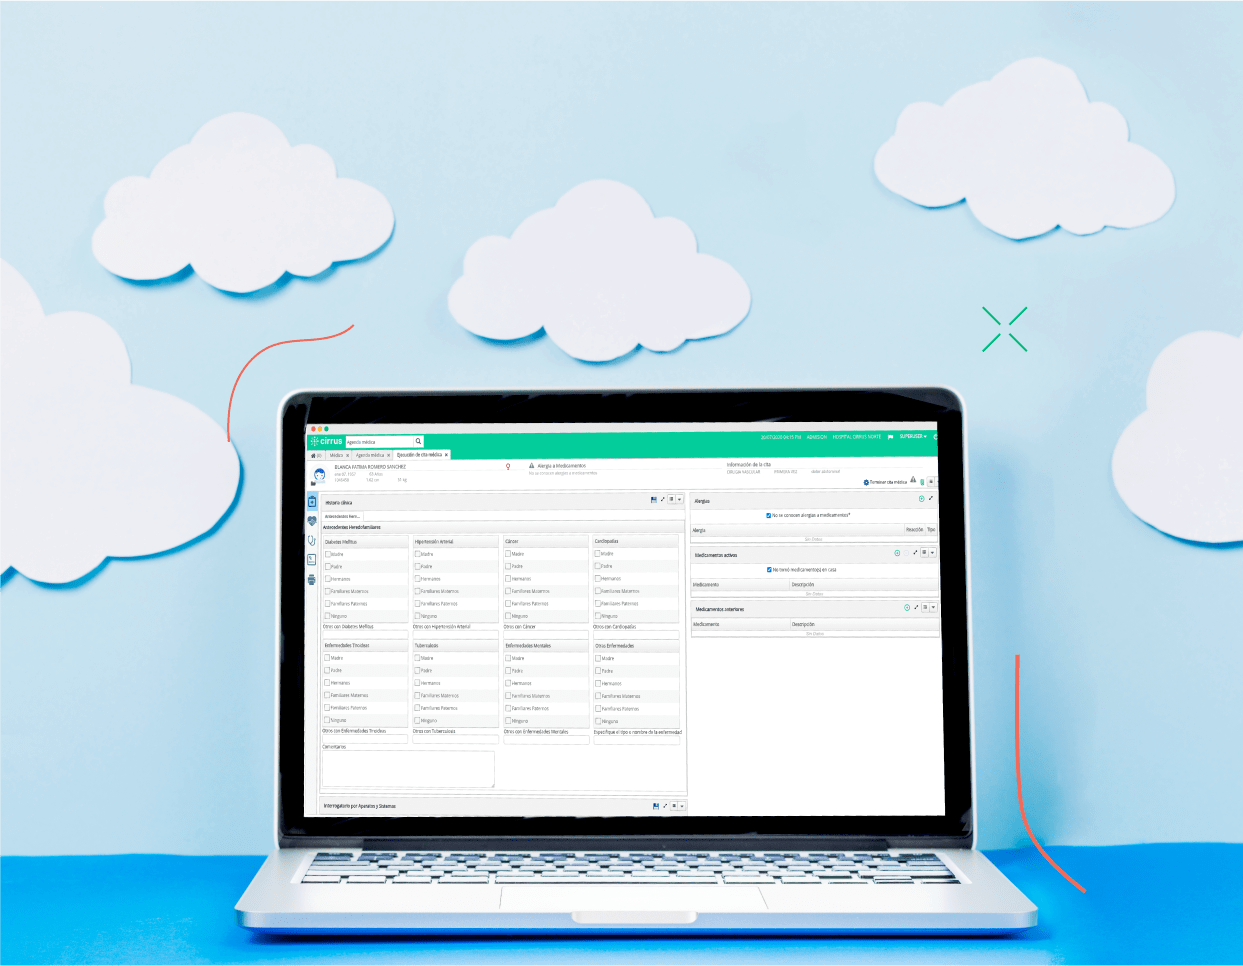 Cirrus is a comprehensive and Cloud software for hospitals